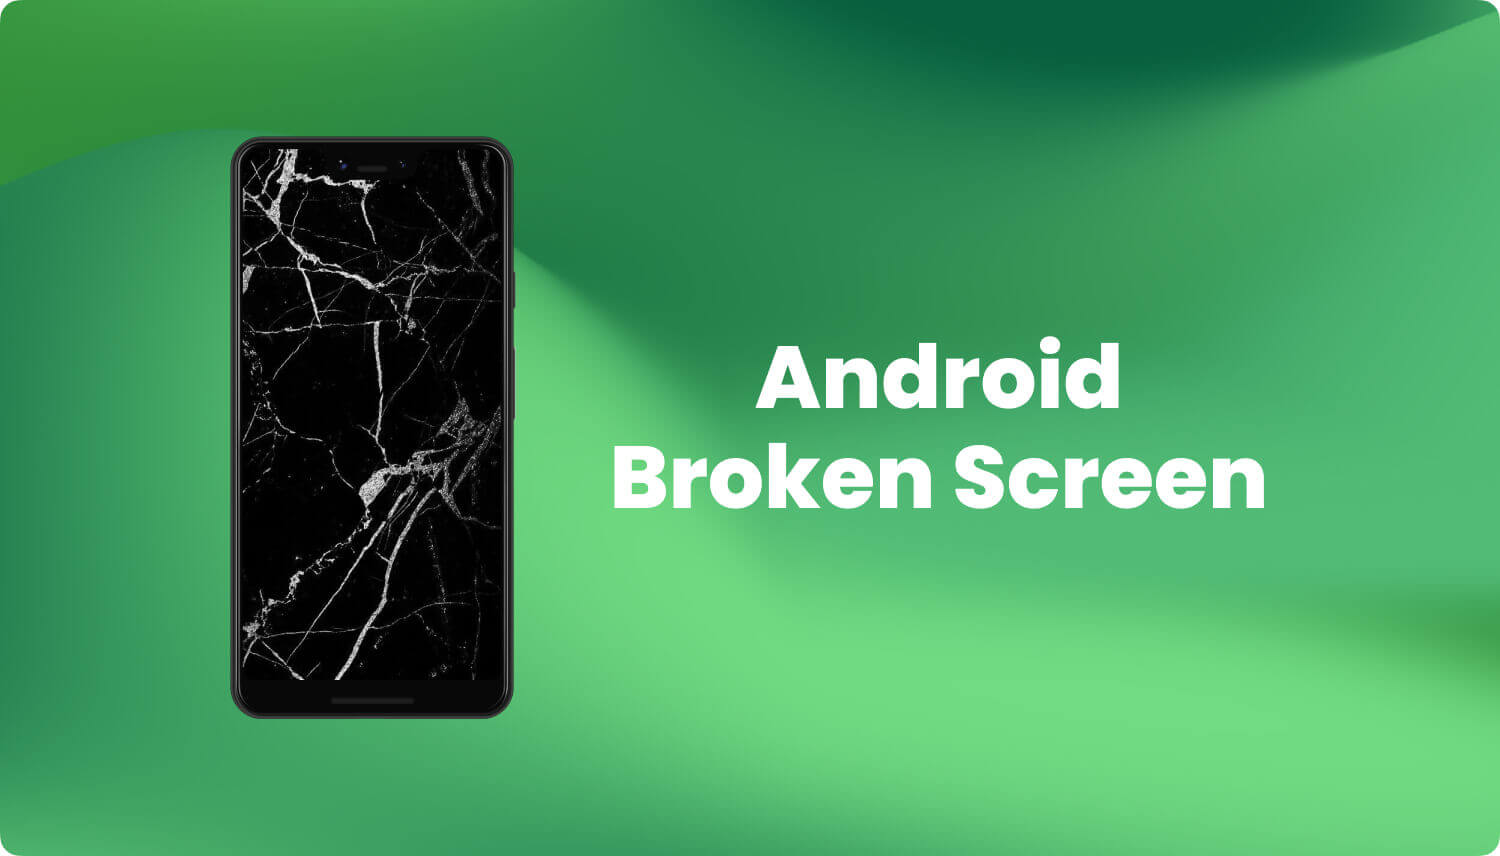 Recover data from S8 with Broken Screen Via Google